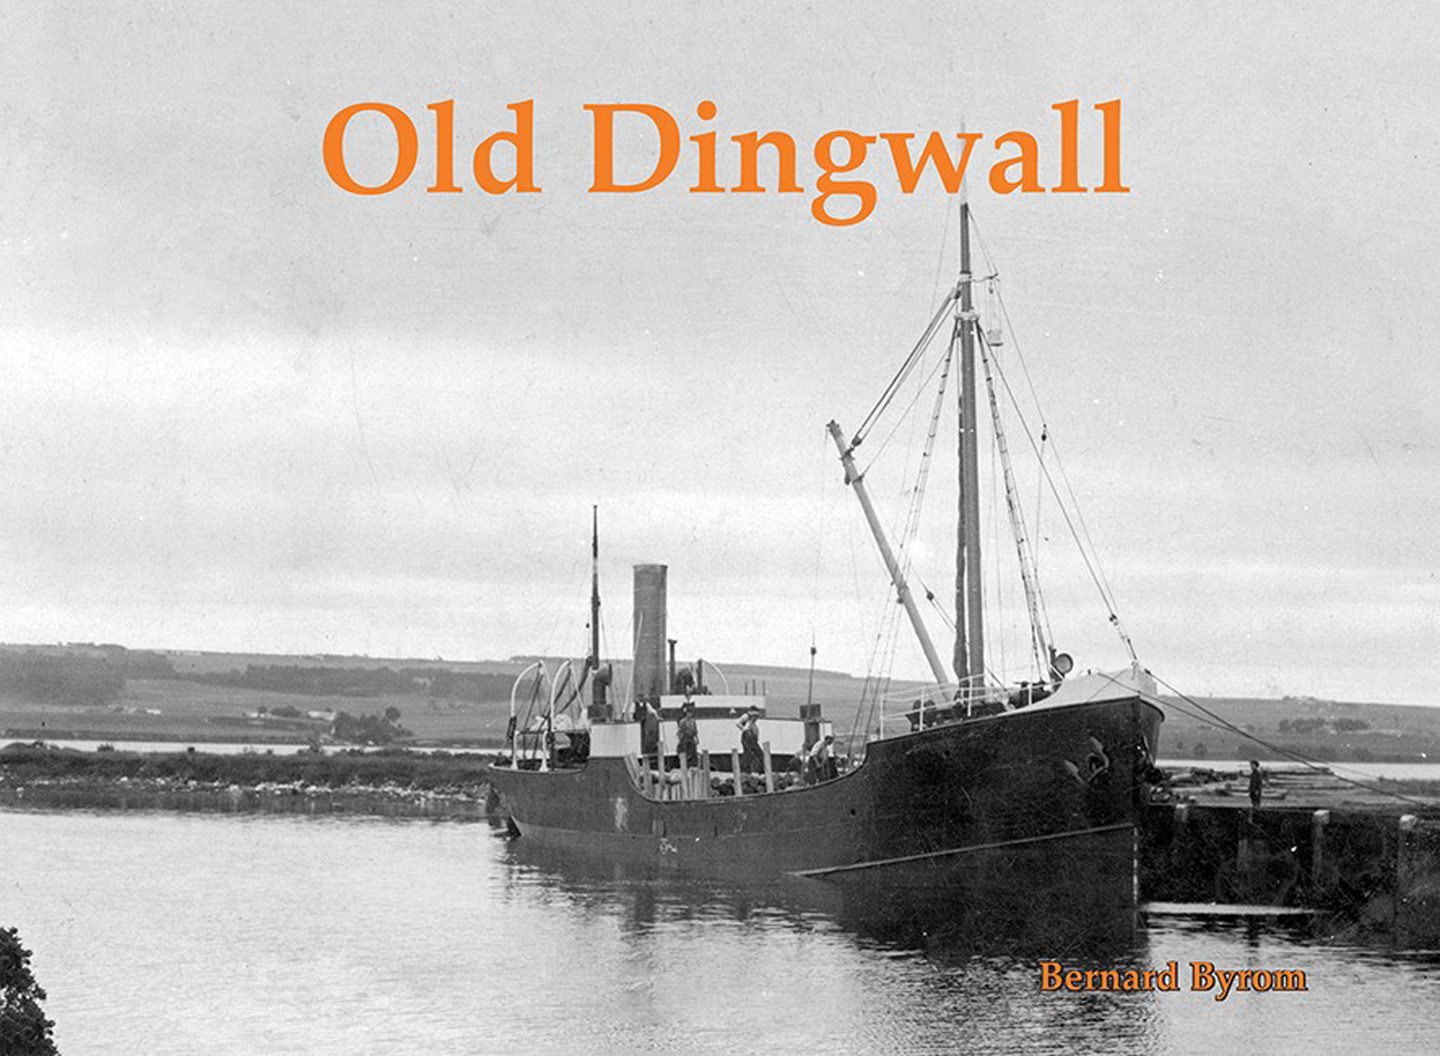 Bernard Byrom has written a compelling history of Old Dingwall.